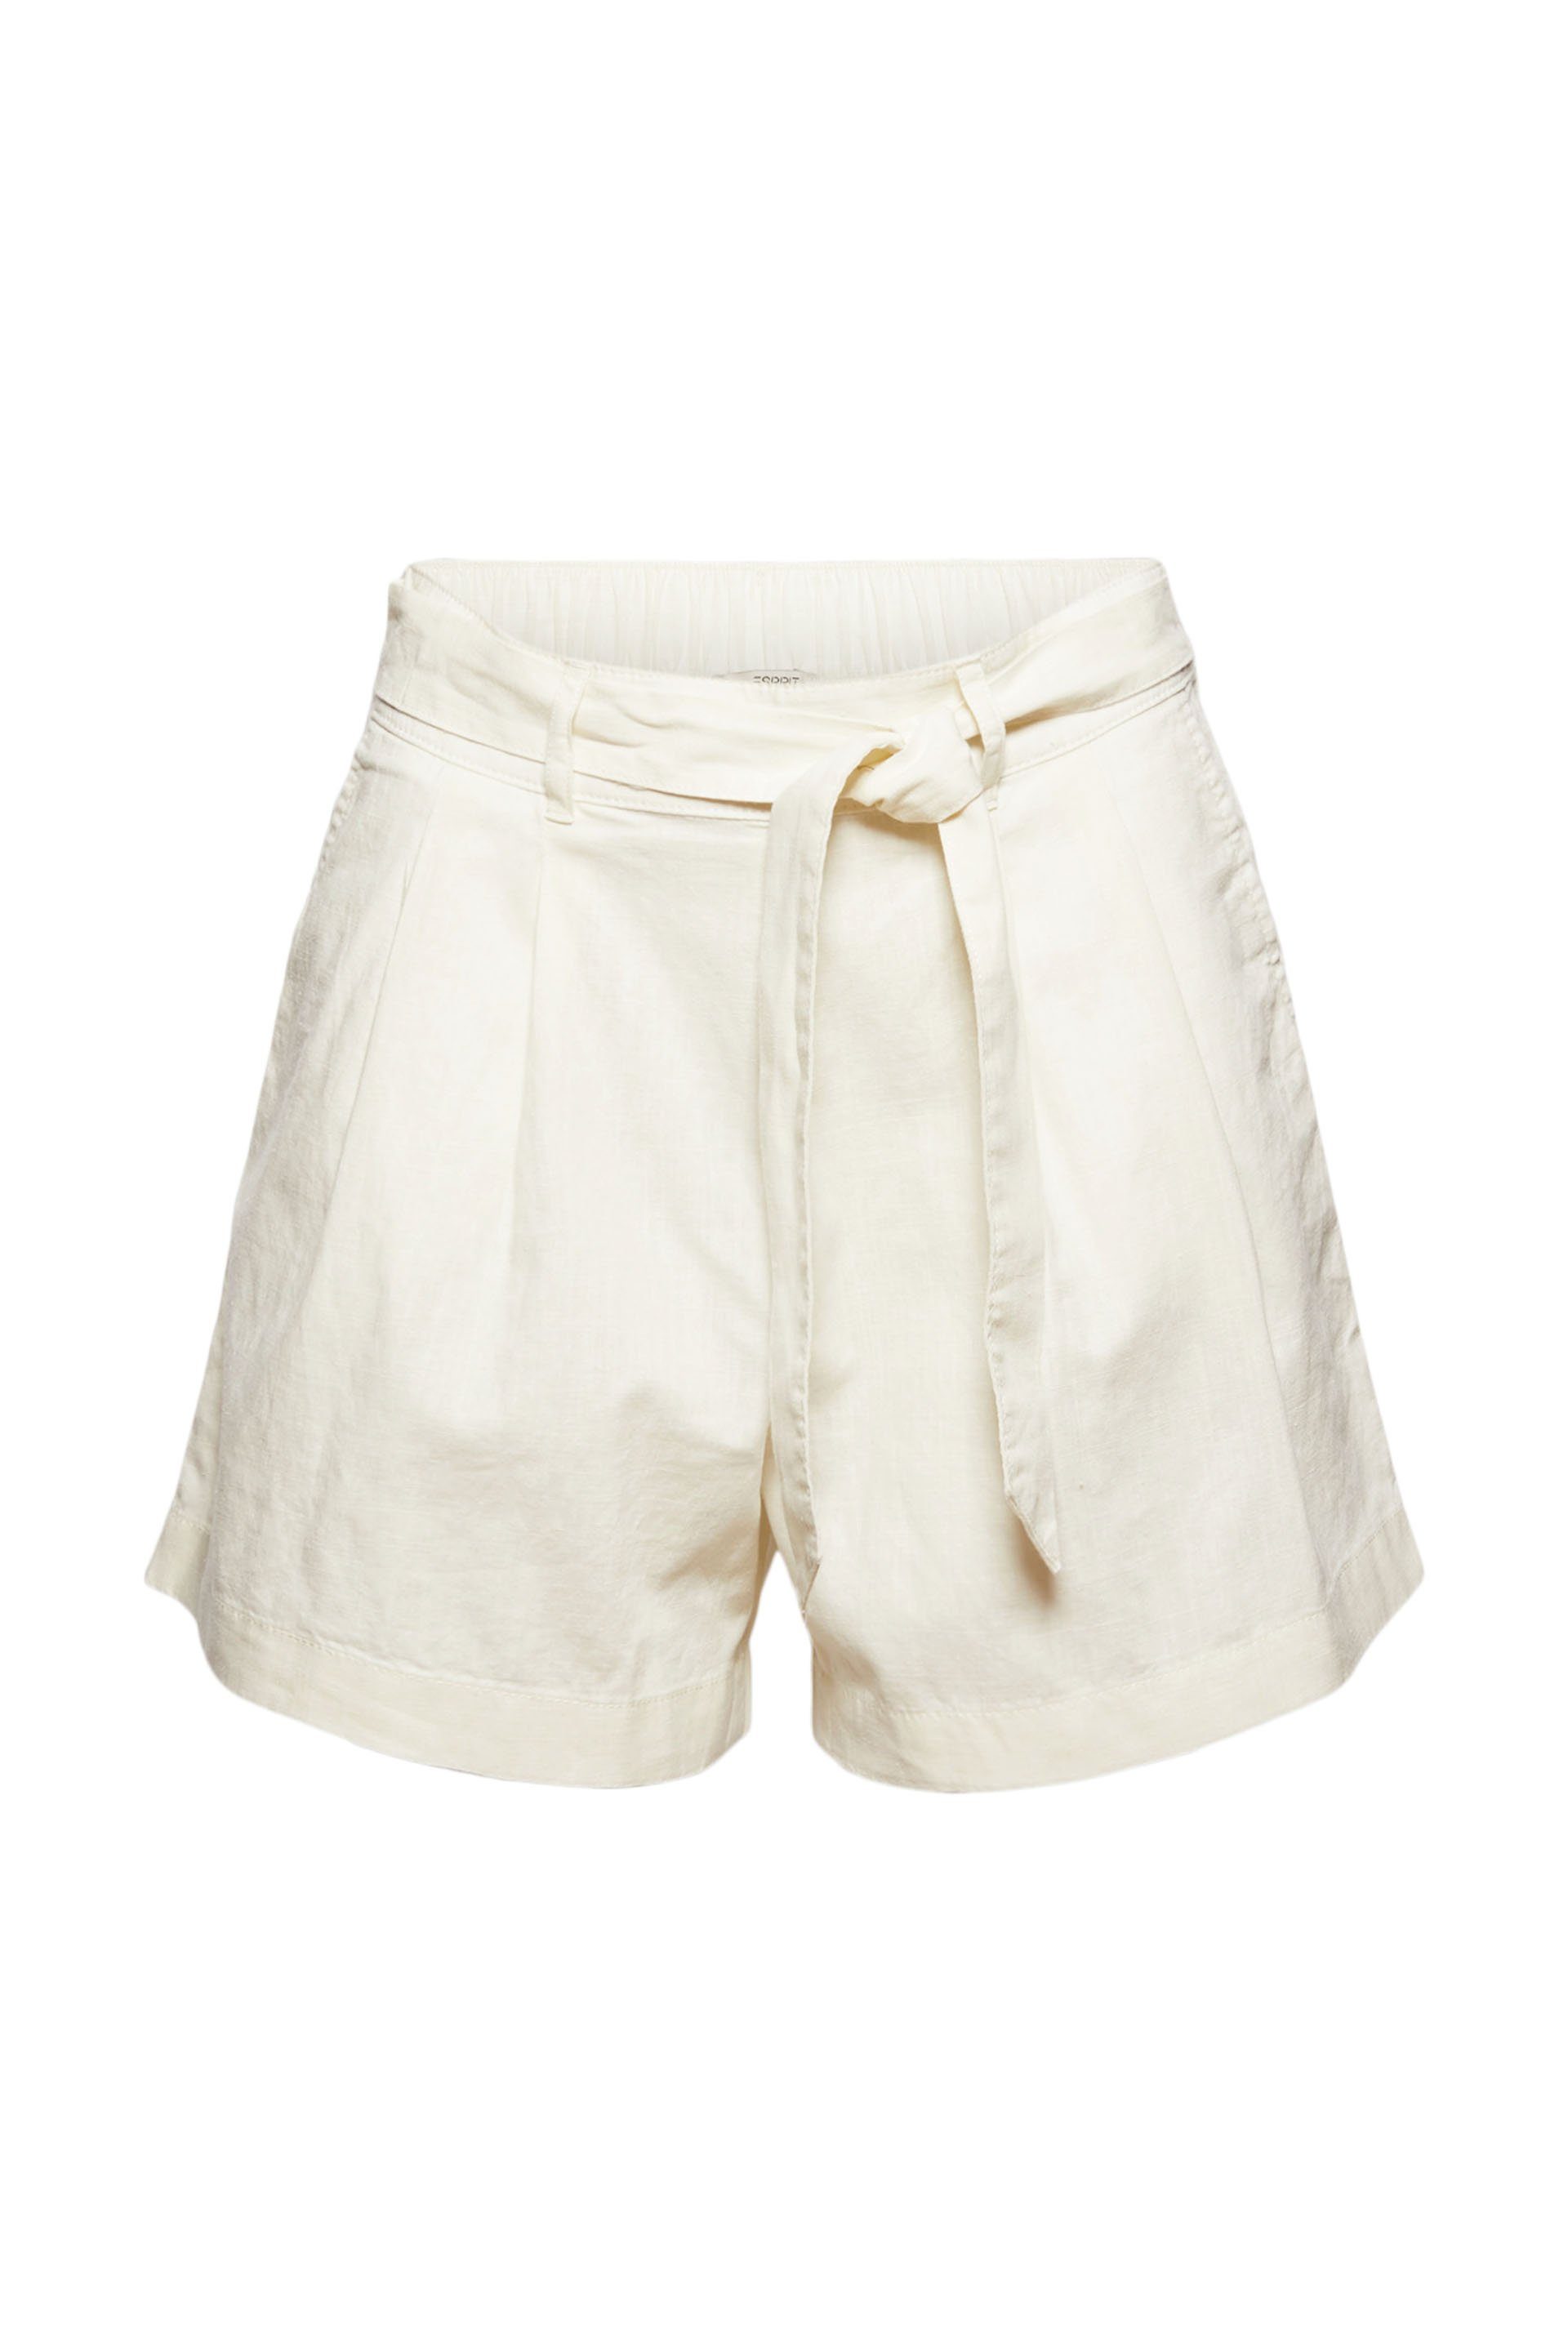 Esprit Collection Shorts off white